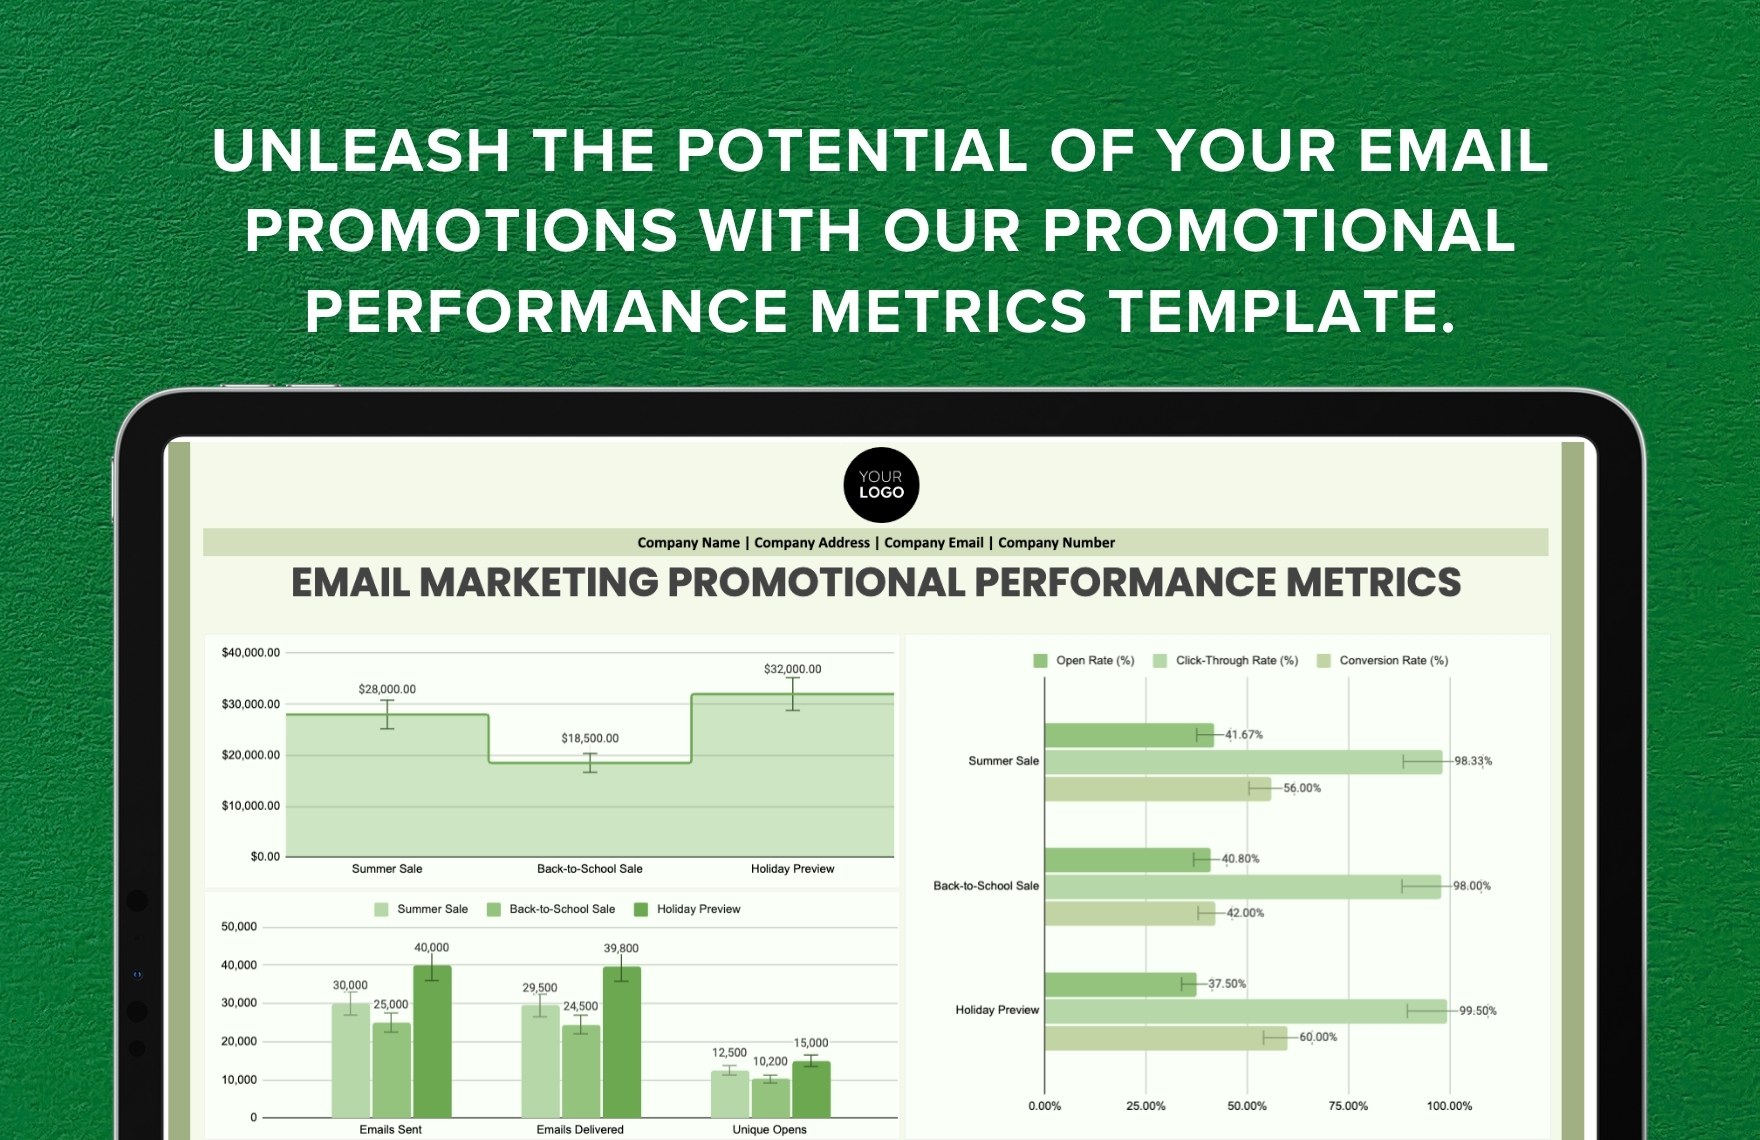 Email Marketing Promotional Performance Metrics Template